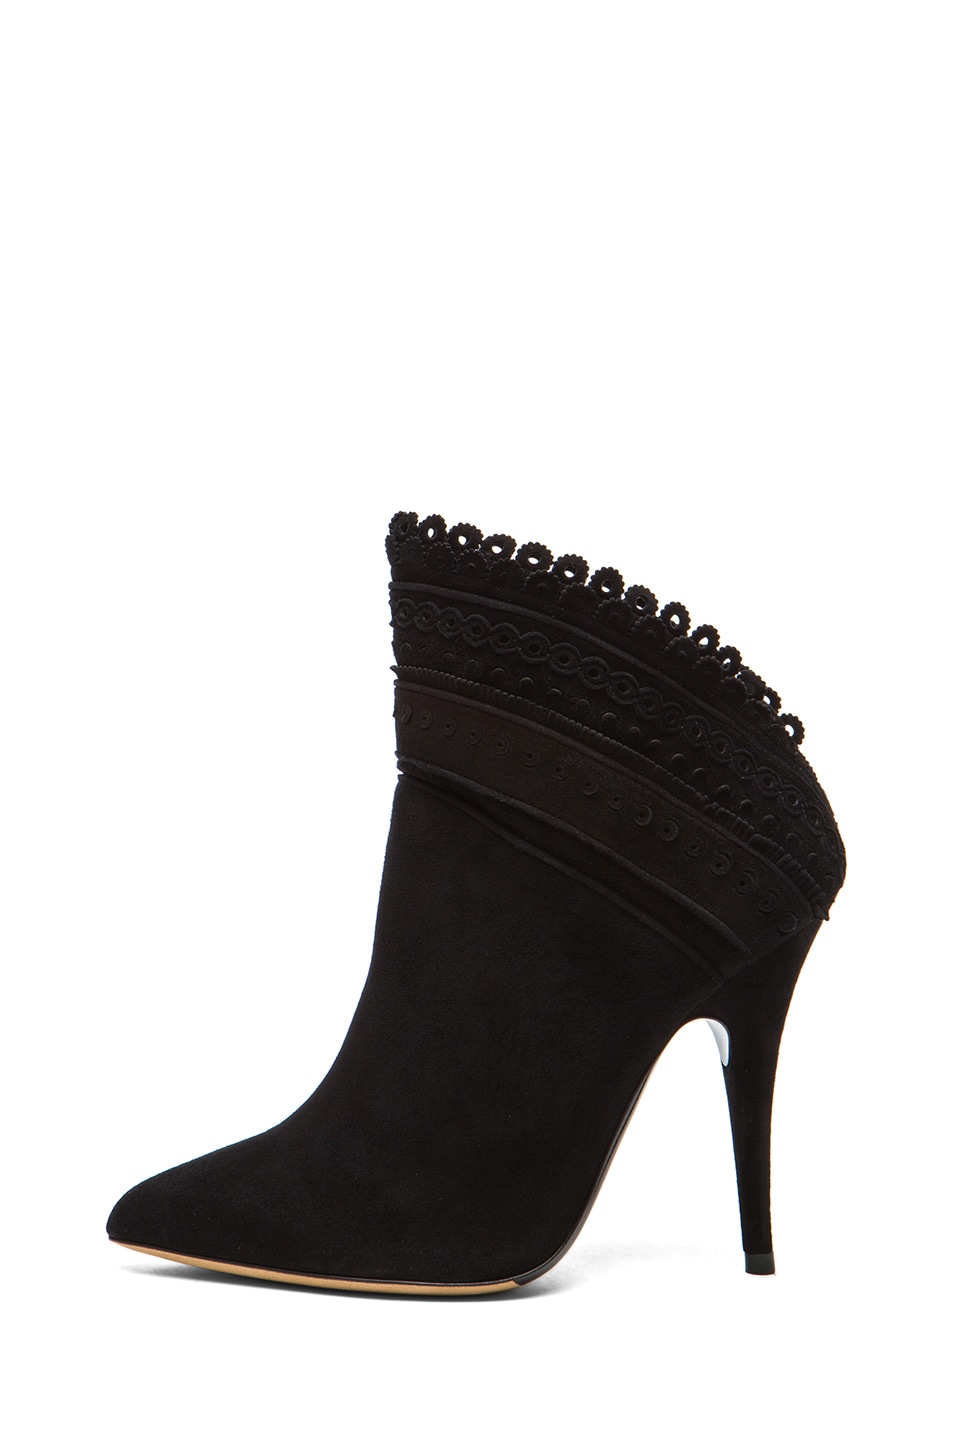 Image 1 of Tabitha Simmons Harmony Suede Booties in Black